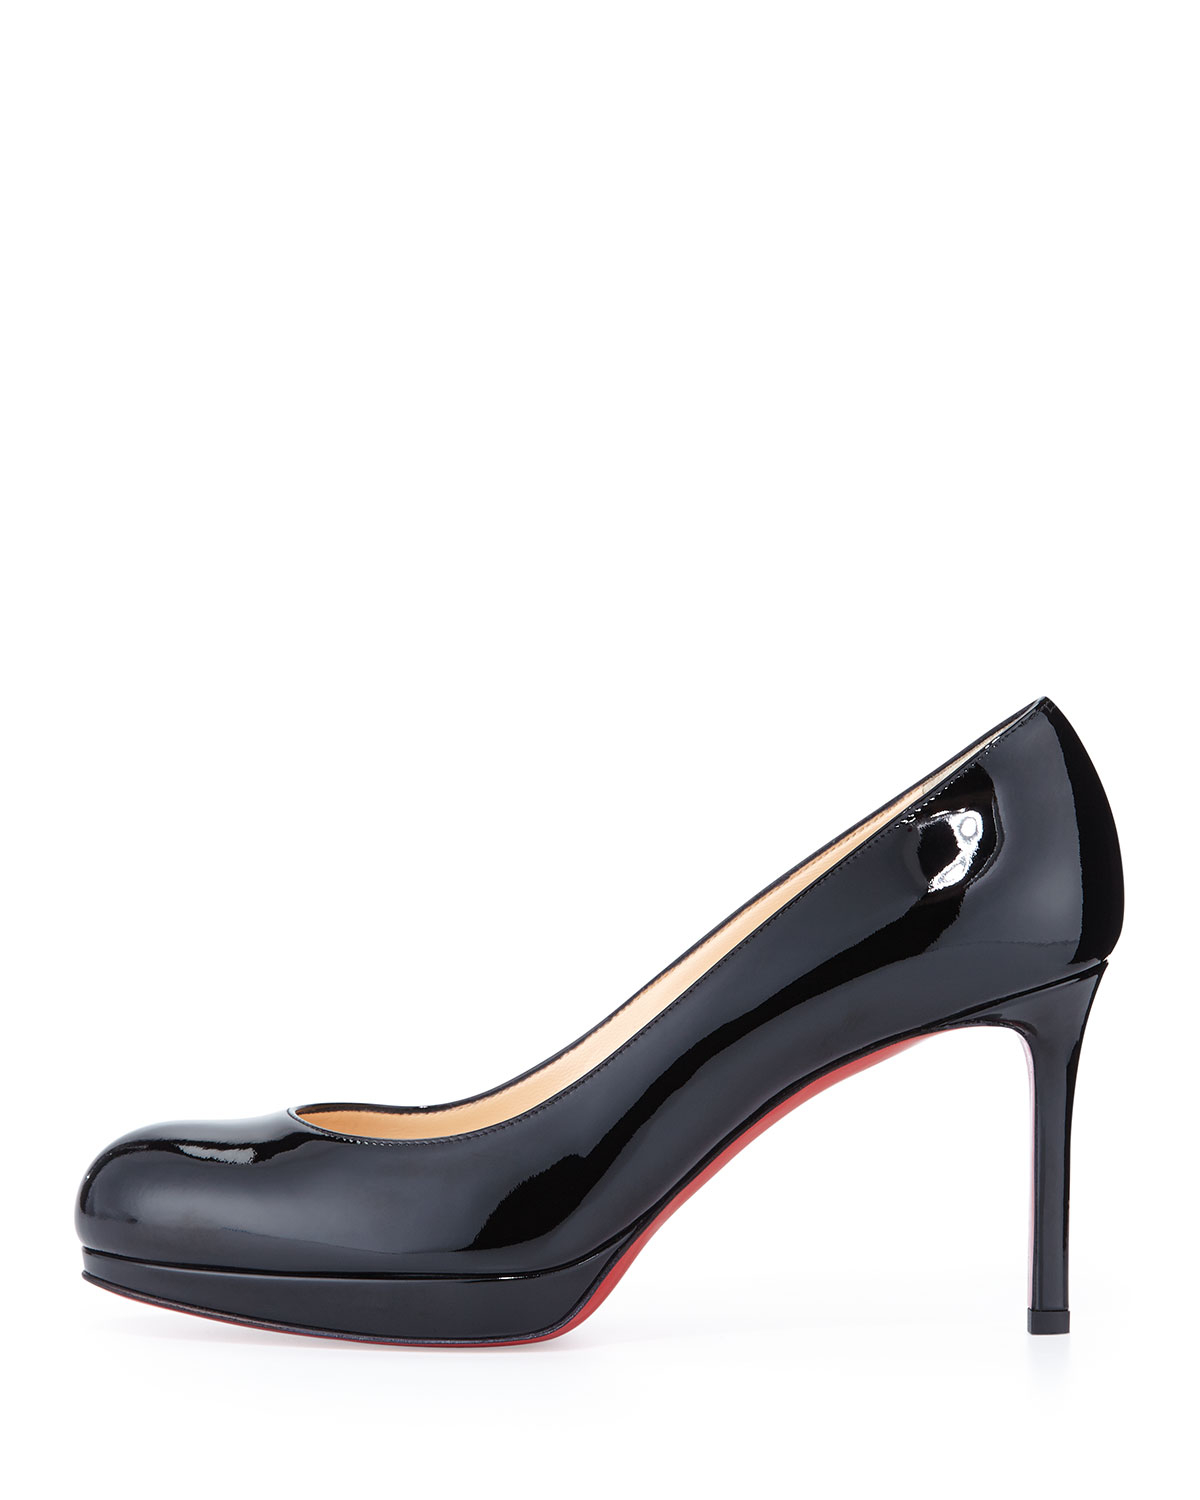 Christian Louboutin New Simple Patent Red Sole Pump in Black | Lyst